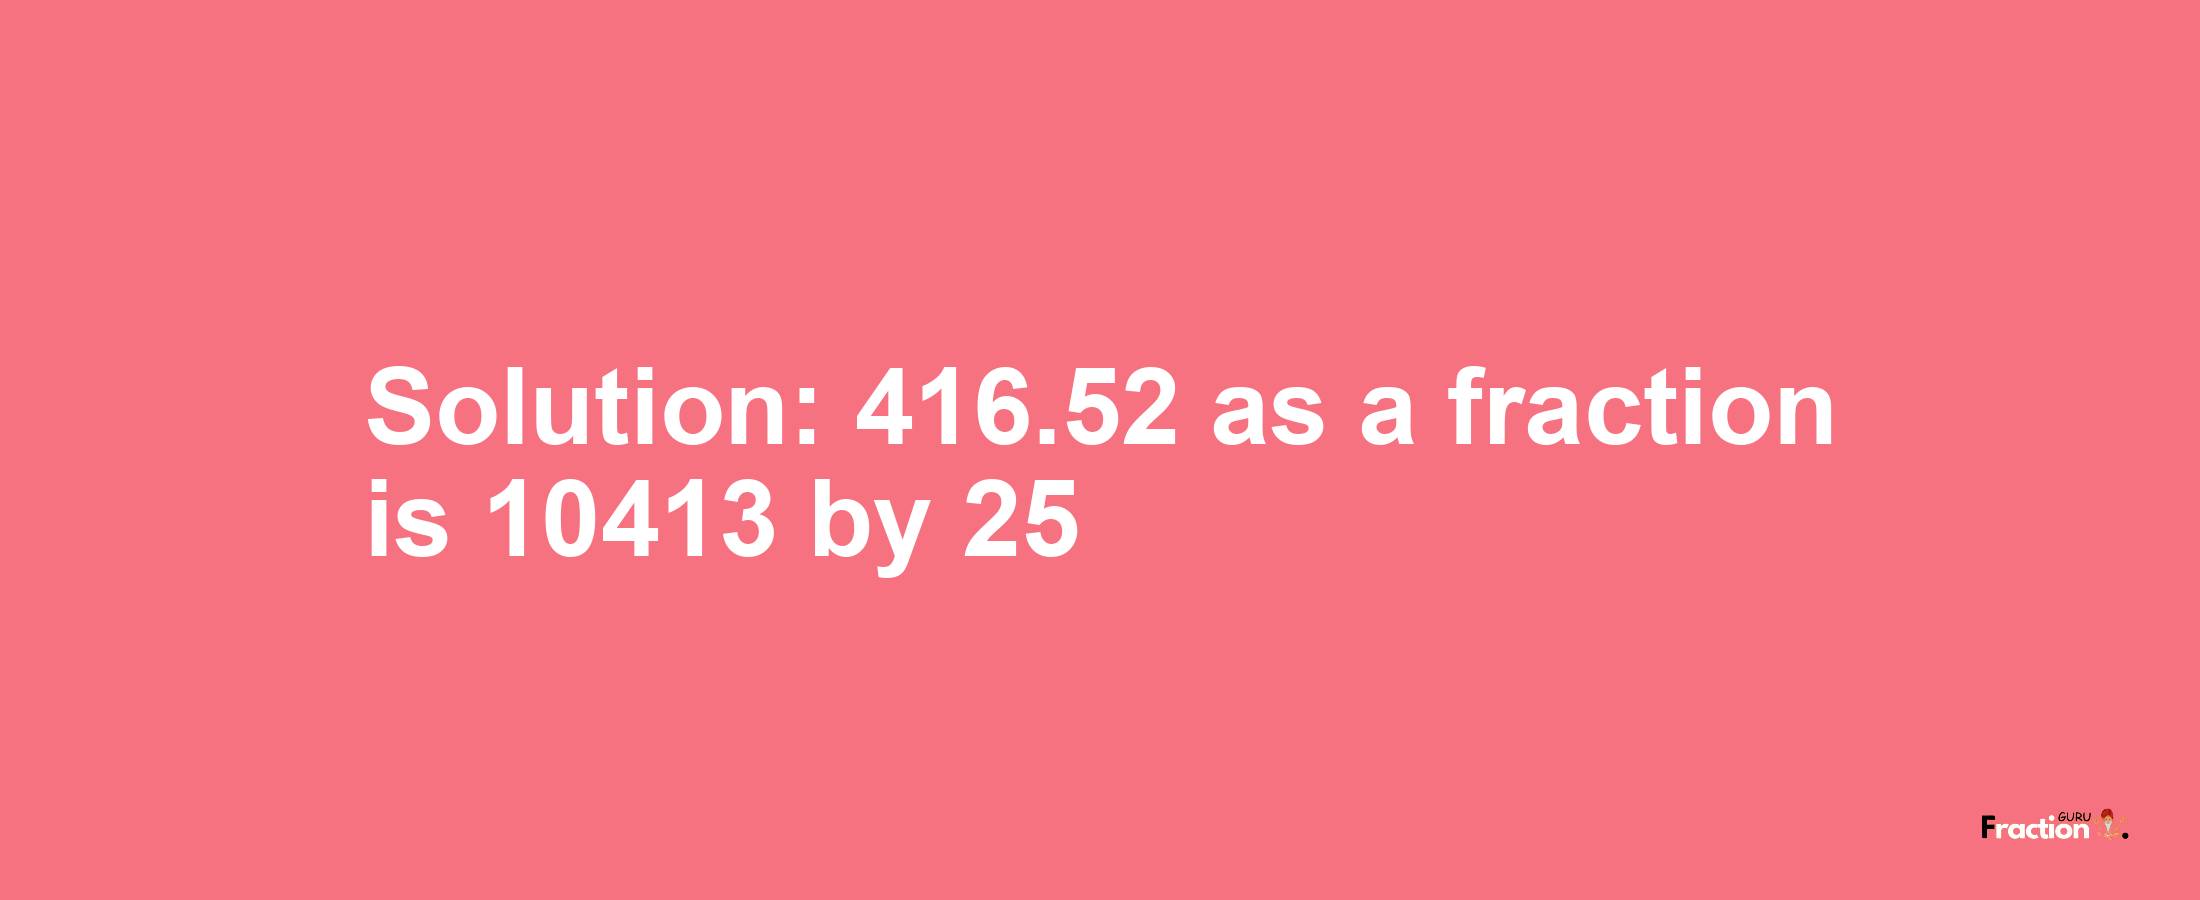 Solution:416.52 as a fraction is 10413/25